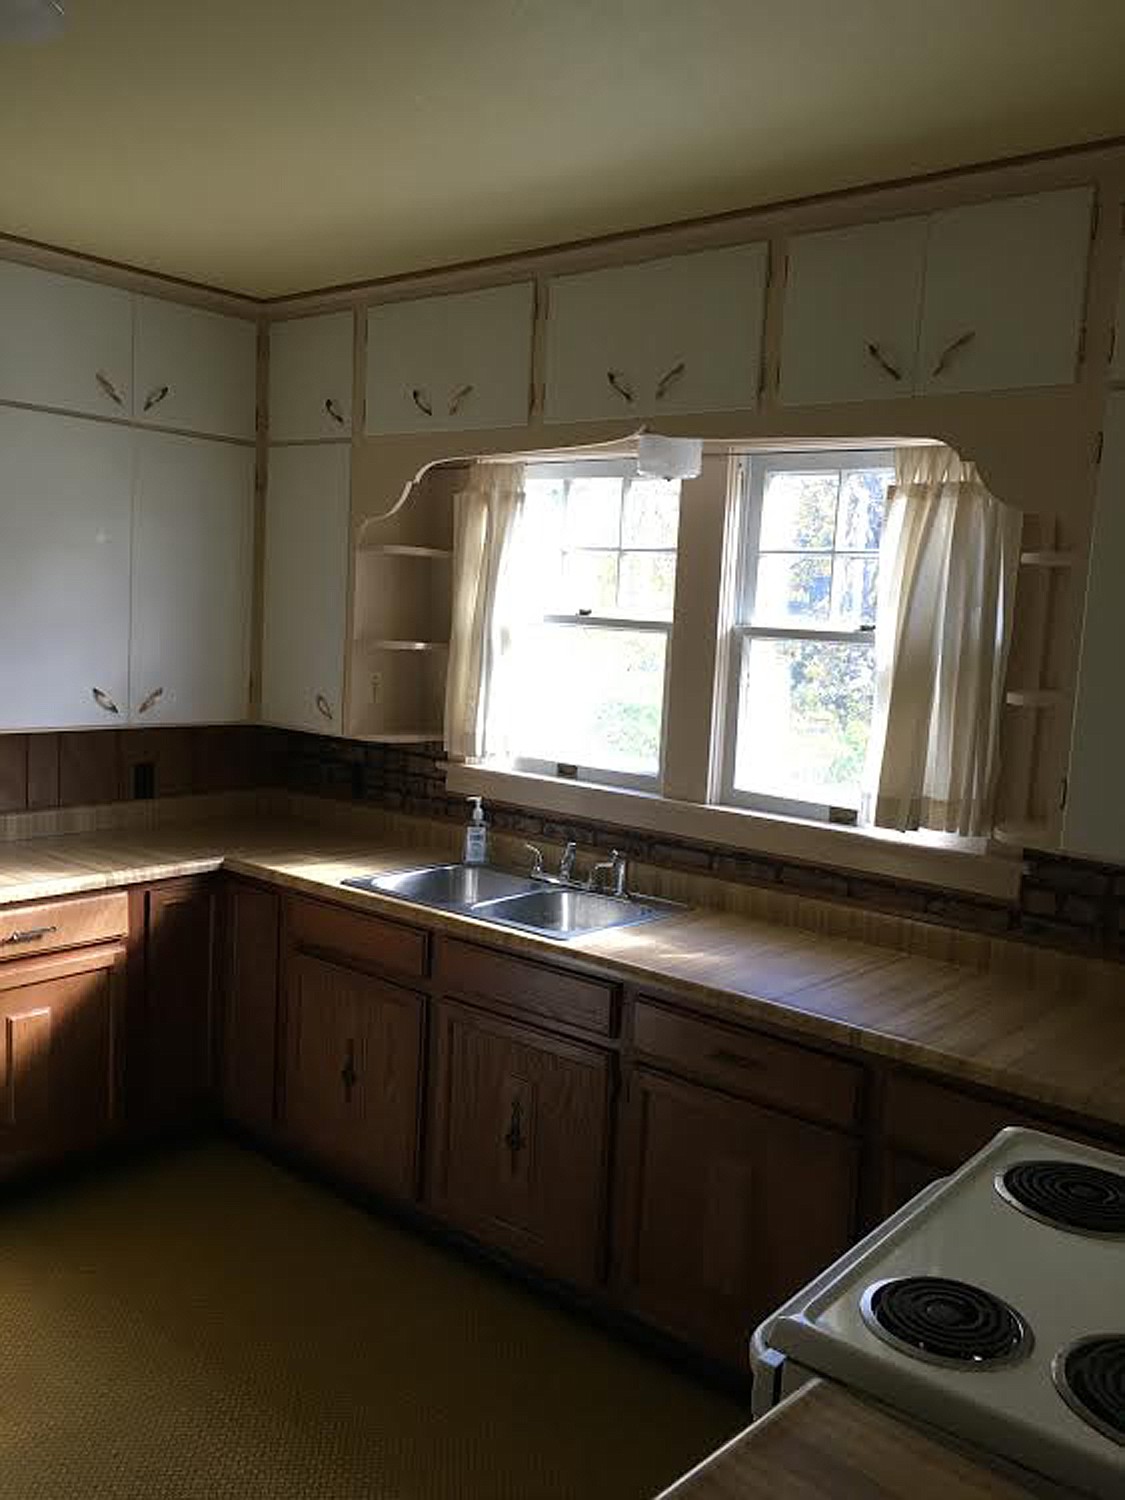 The kitchen of the Nelson&#146;s historic Kalispell home is pictured prior to their renovation. (Courtesy of Ryan Nelson)